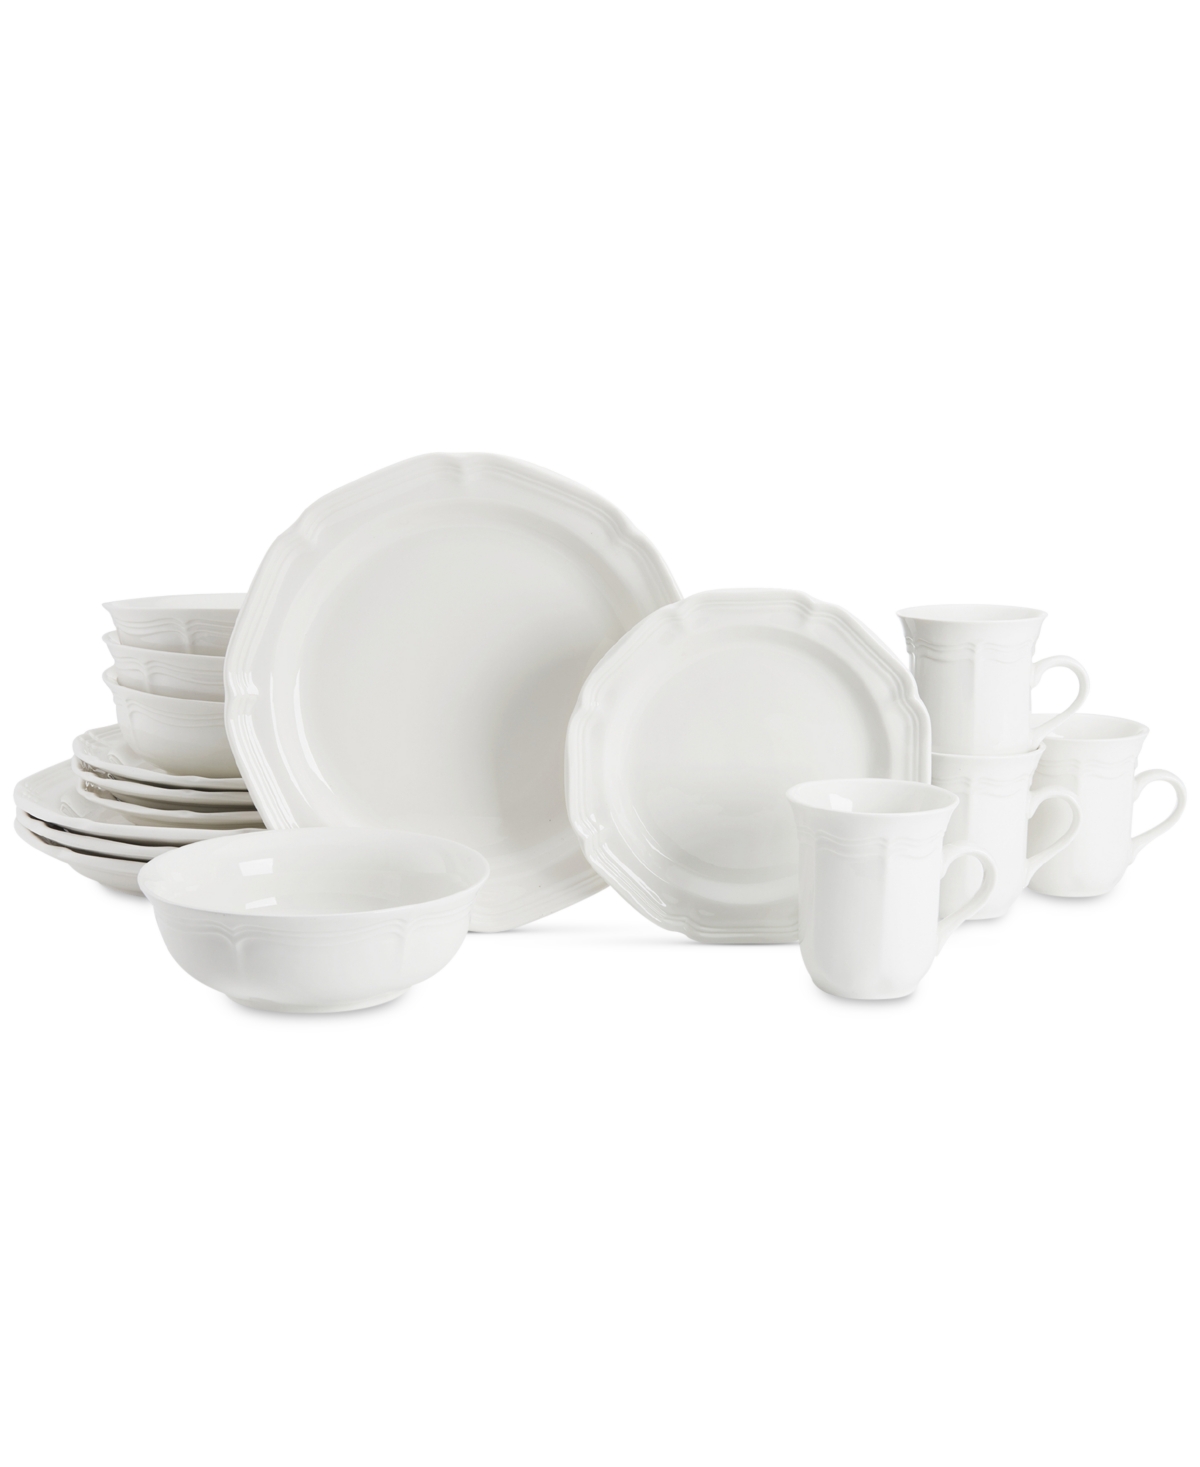 French Countryside Collection 16-Pc. Dinnerware Set, Service for 4 - White Grou